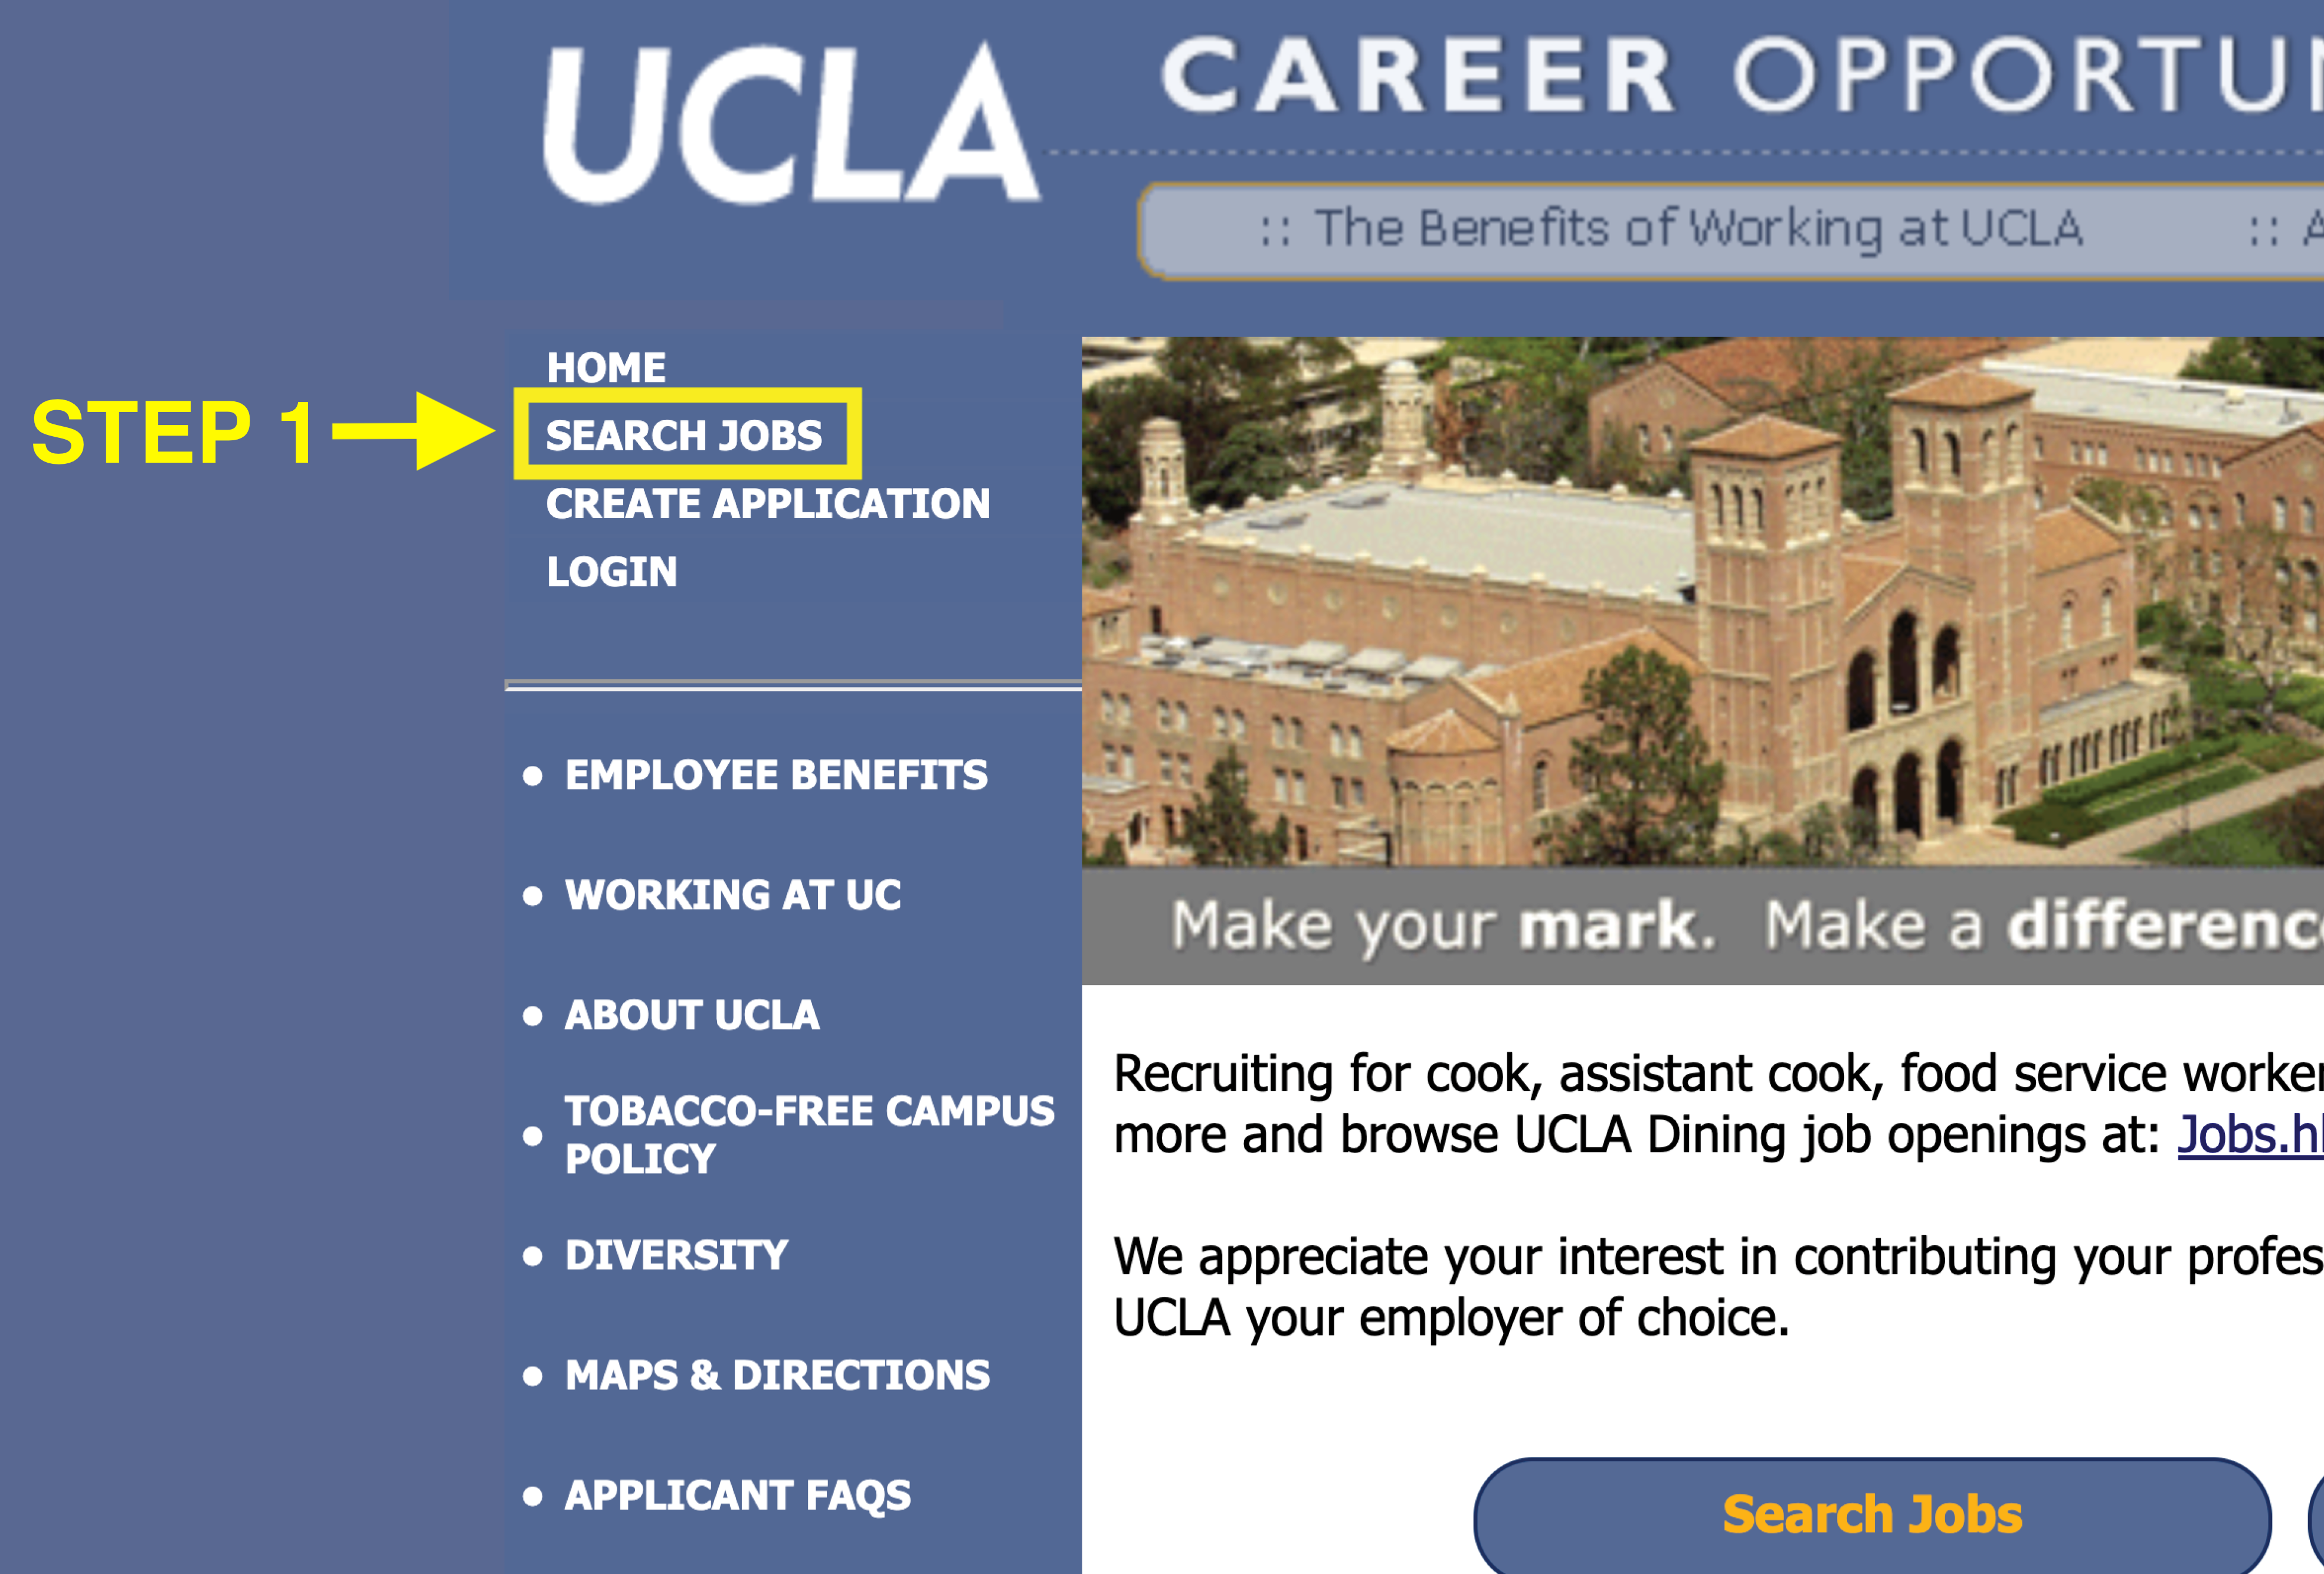 A screenshot of the UCLA Career Opportunities landing page, with a yellow arrow pointing to the left sidebar menu option "Search Jobs" and a label to left reads "STEP 1"